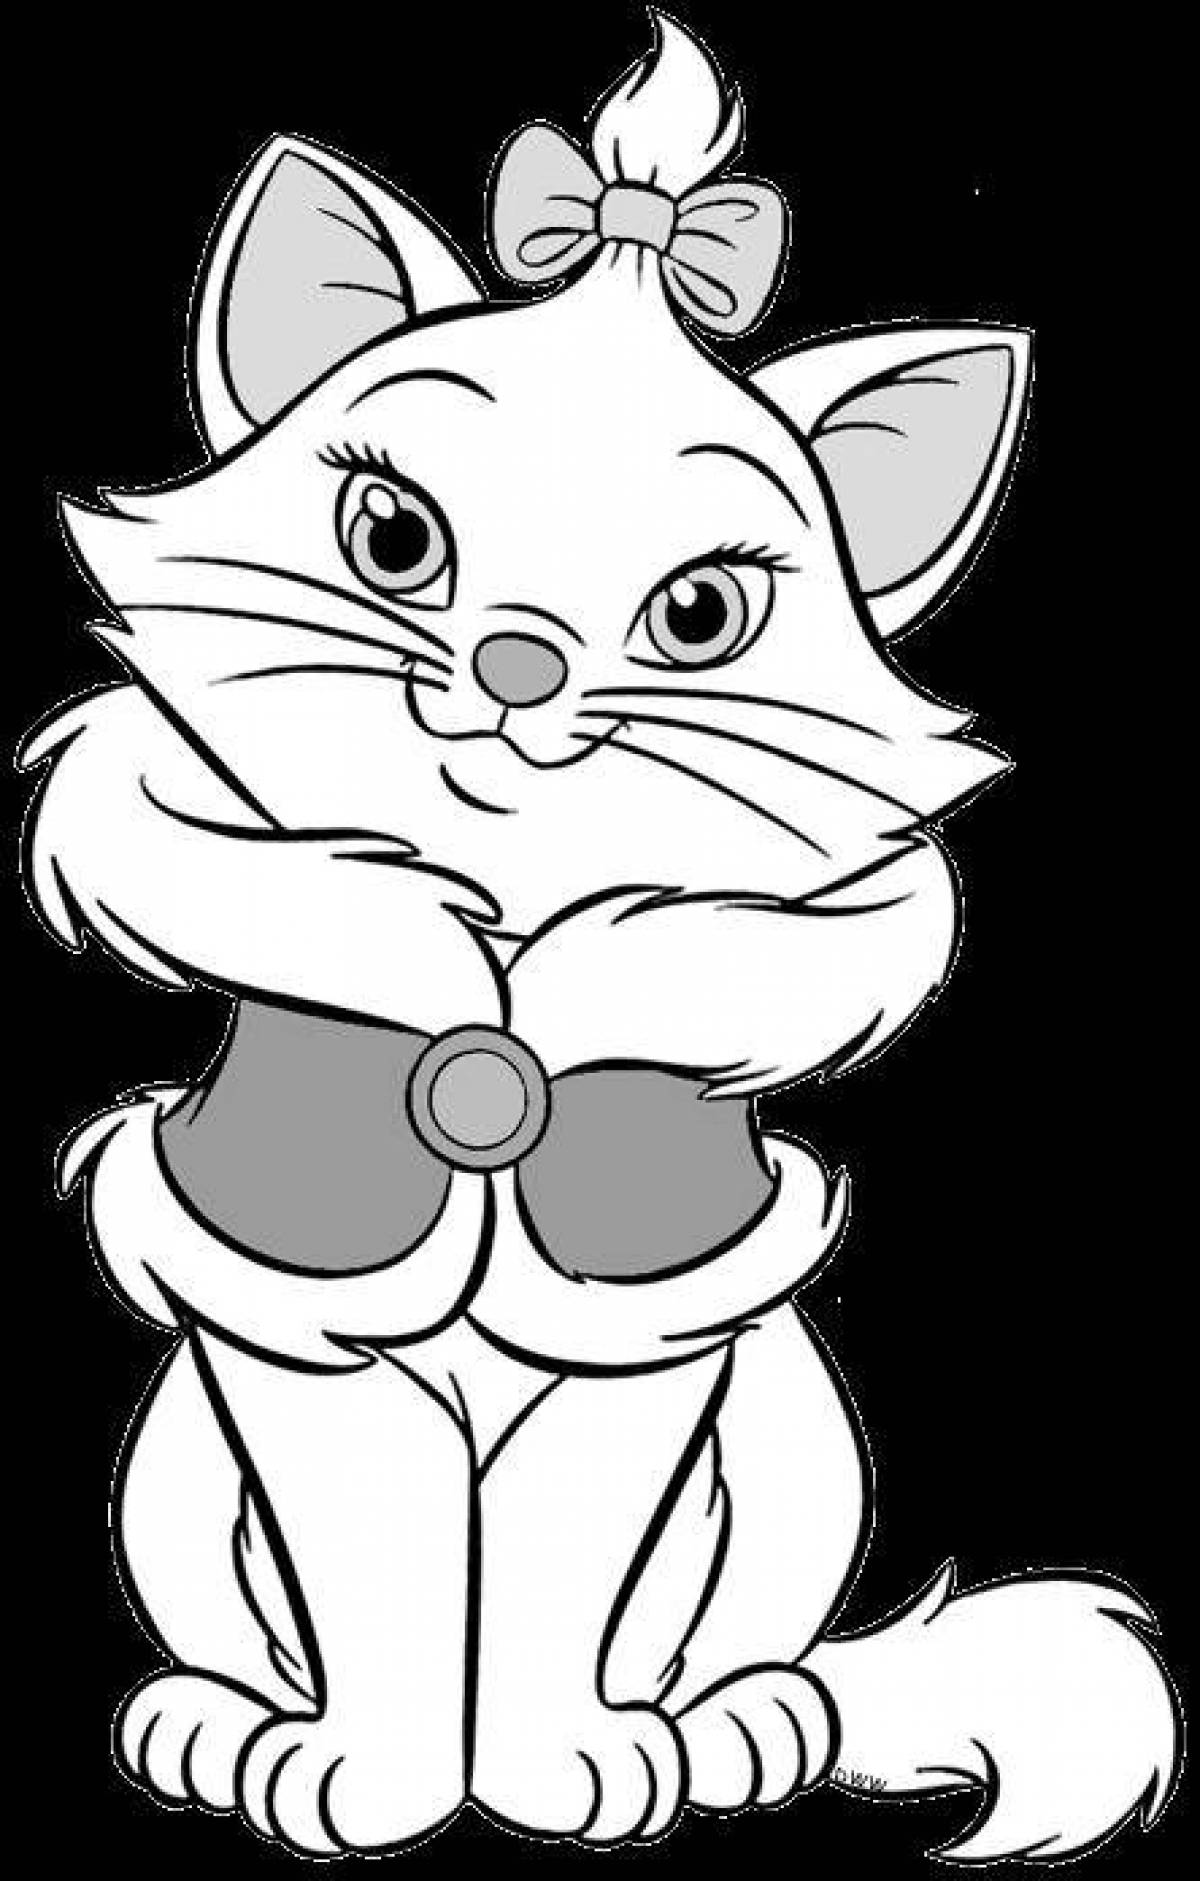 Coloring book funny kitten with a bow